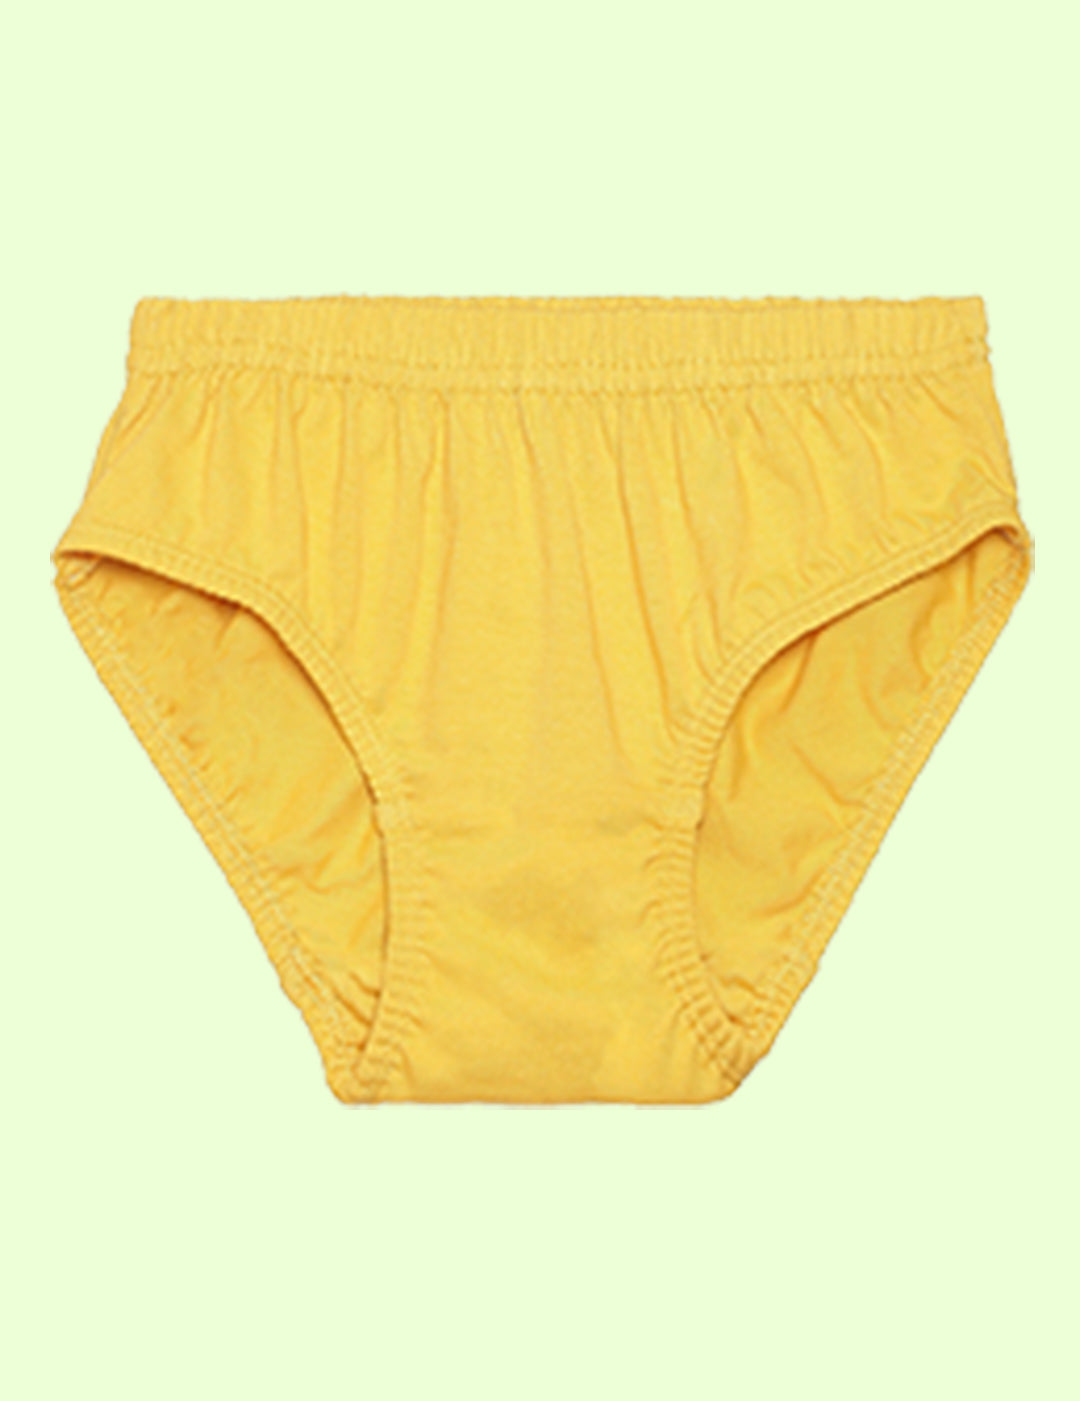 Nusyl Boys solid briefs combo-pack of 3 (Yellow,Royal Blue,White)